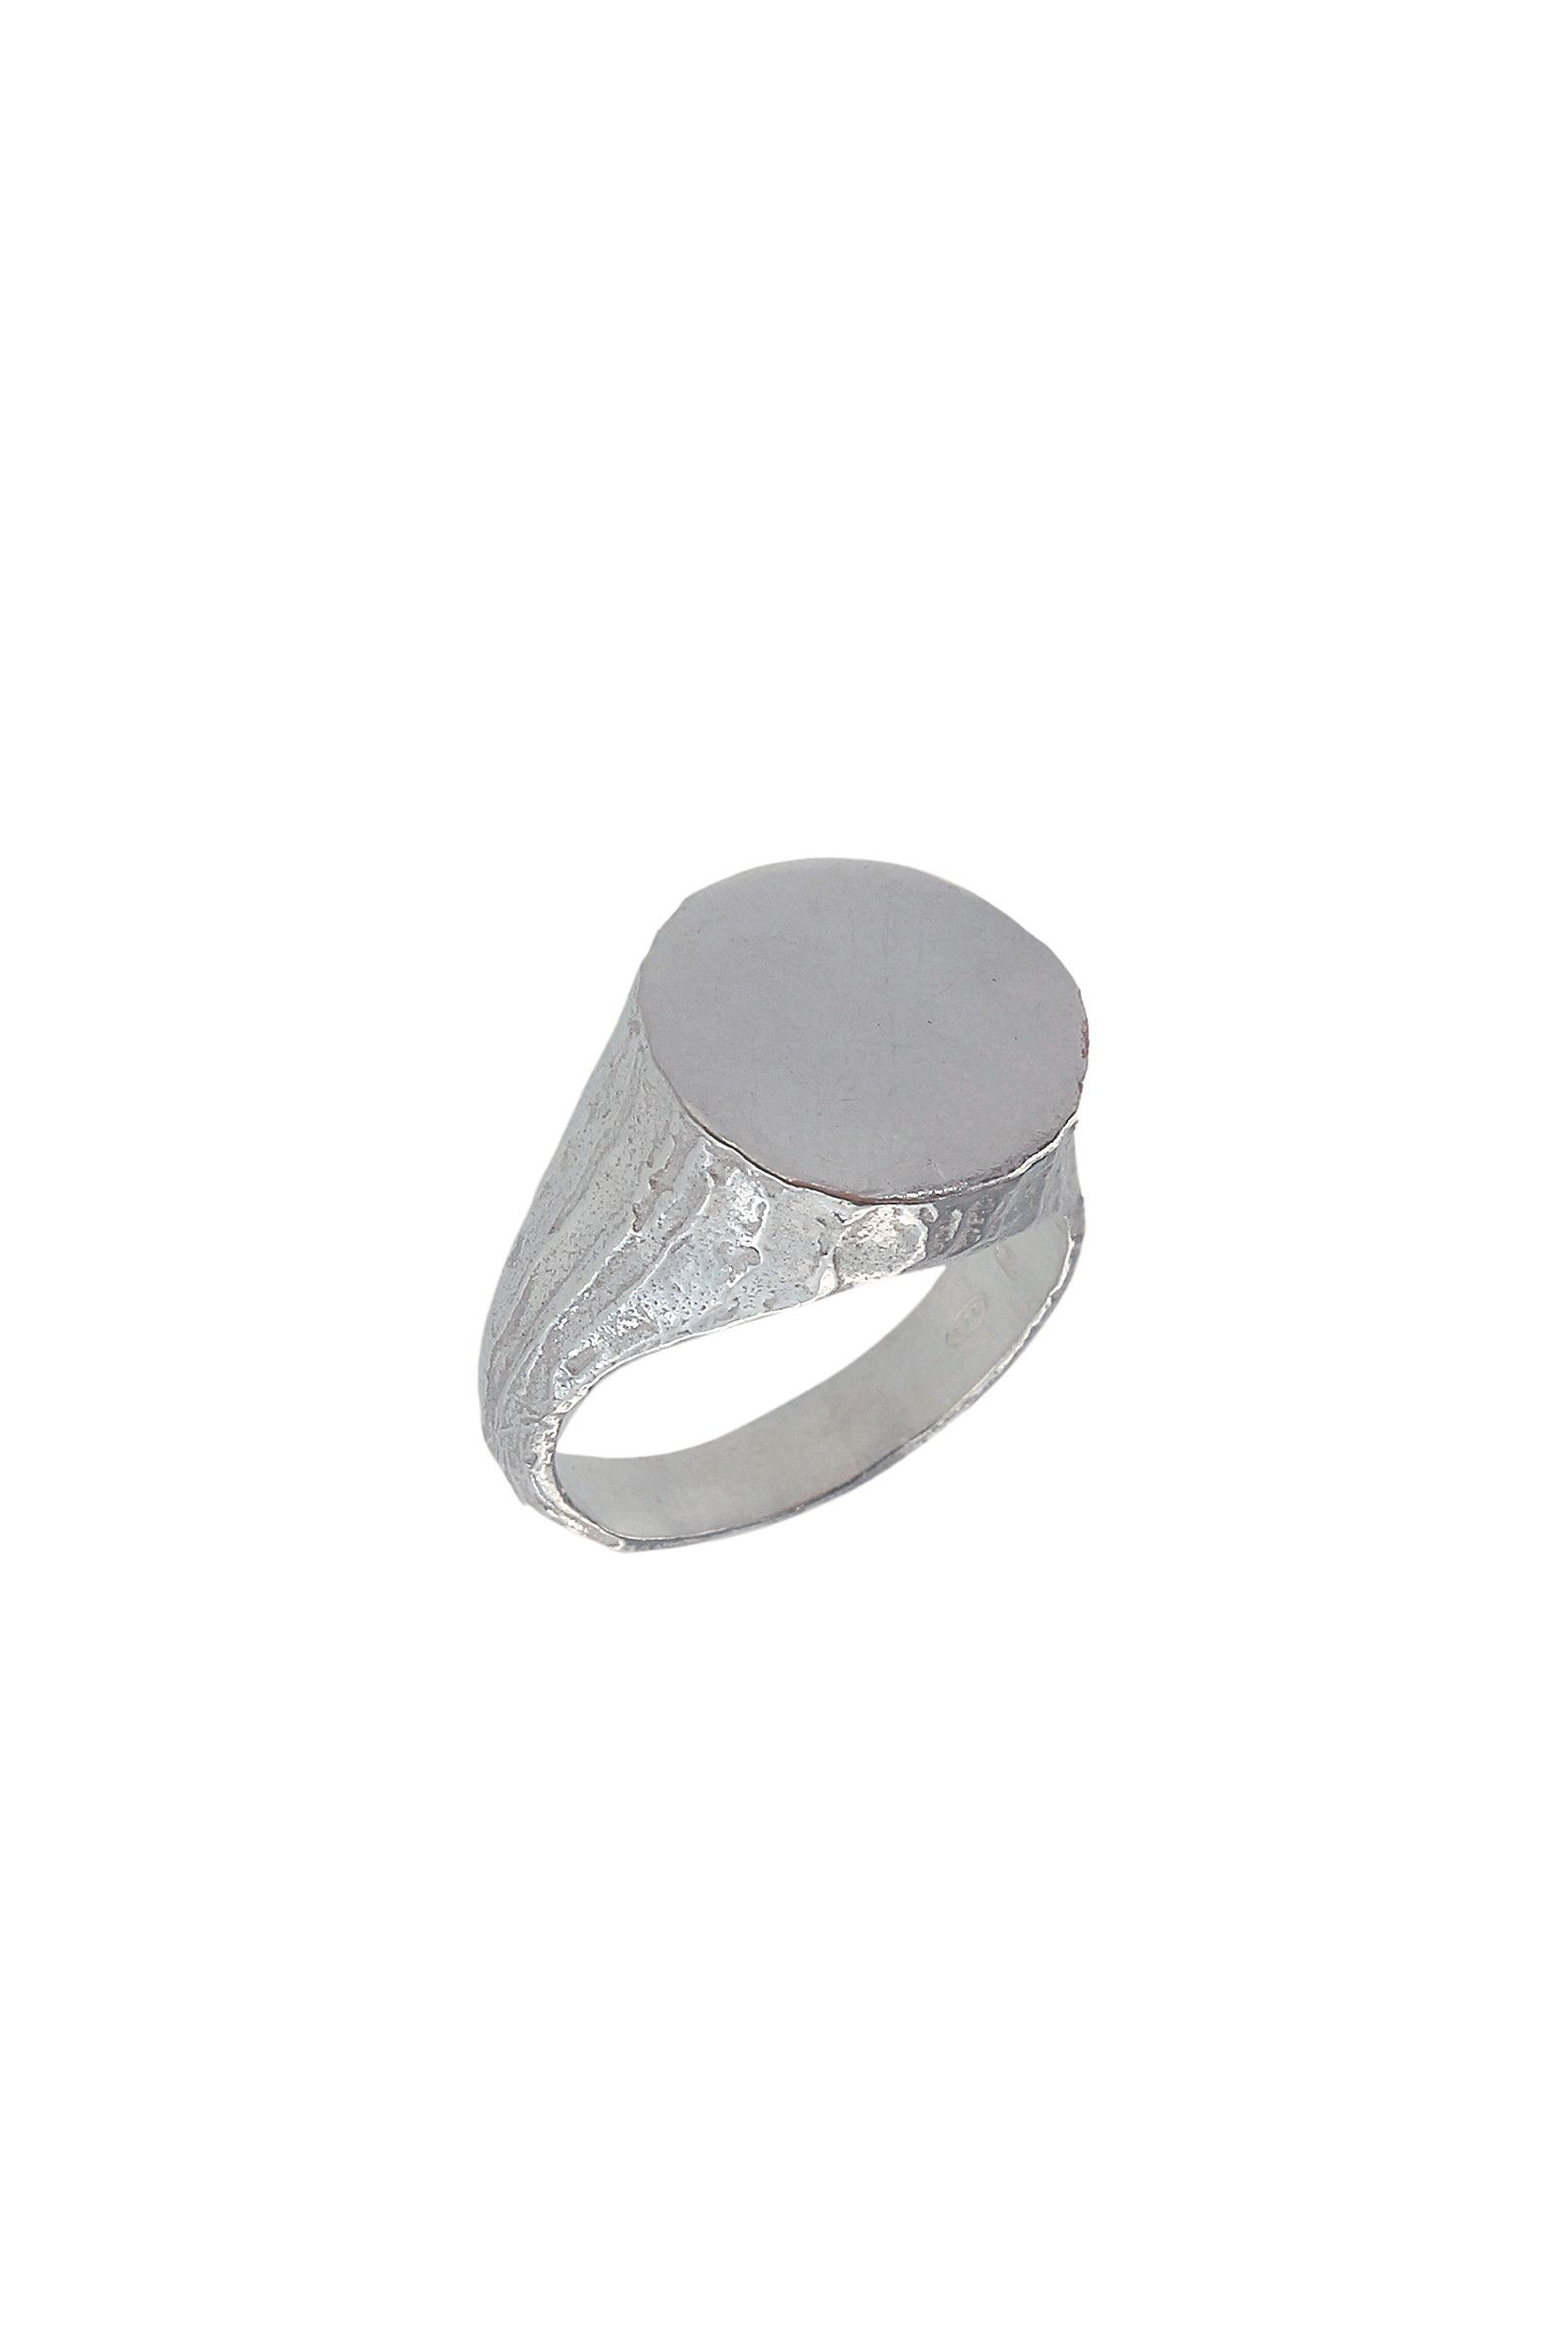 AEXX5-Sterling-Silver-925-Round-Signet-Ring-1_